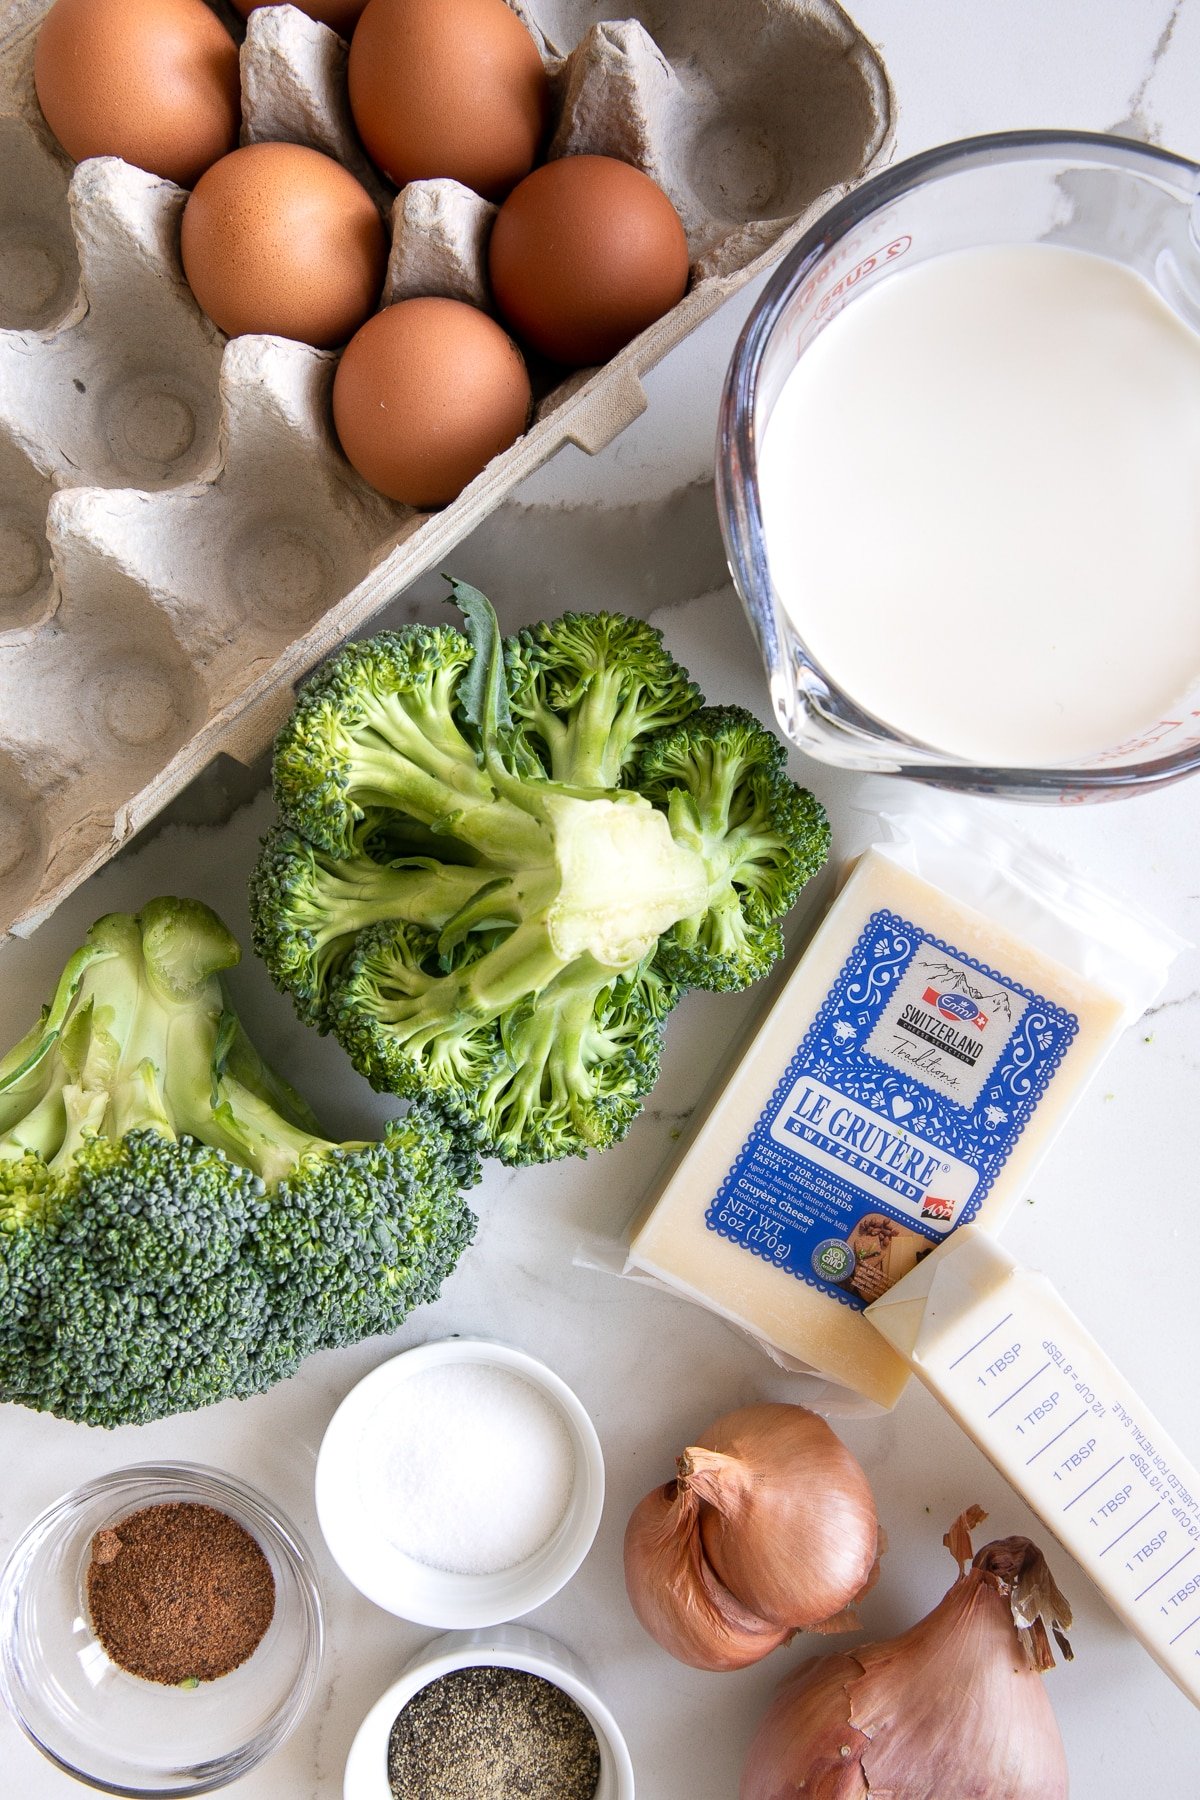 Image of the ingredients needed to make a simple crustless quiche with broccoli.